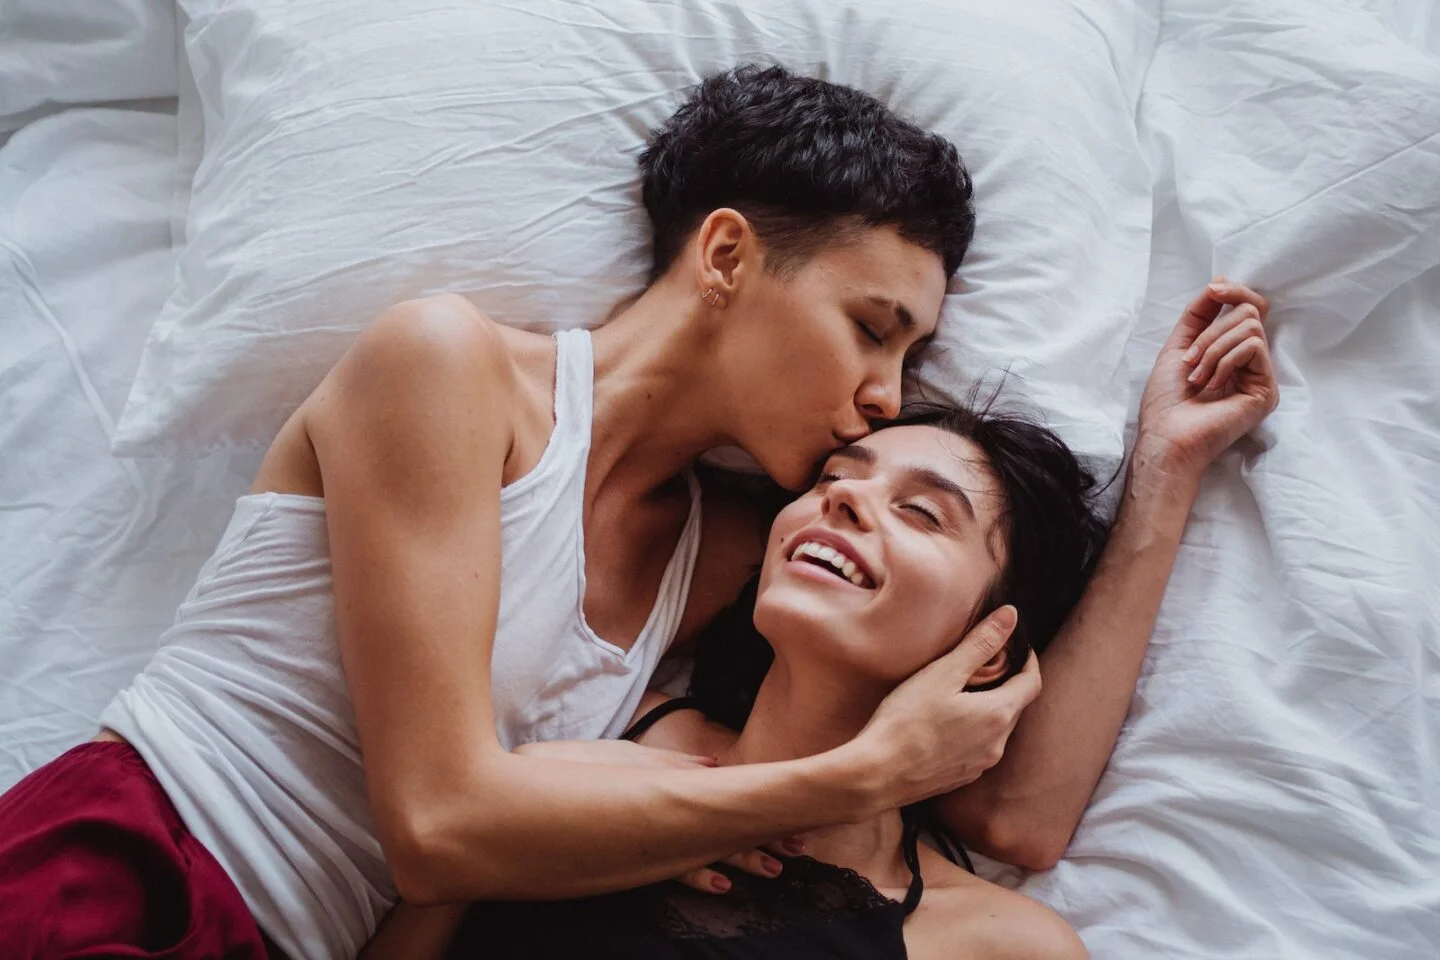 Study finds lesbian women more like to orgasm than straight counterparts